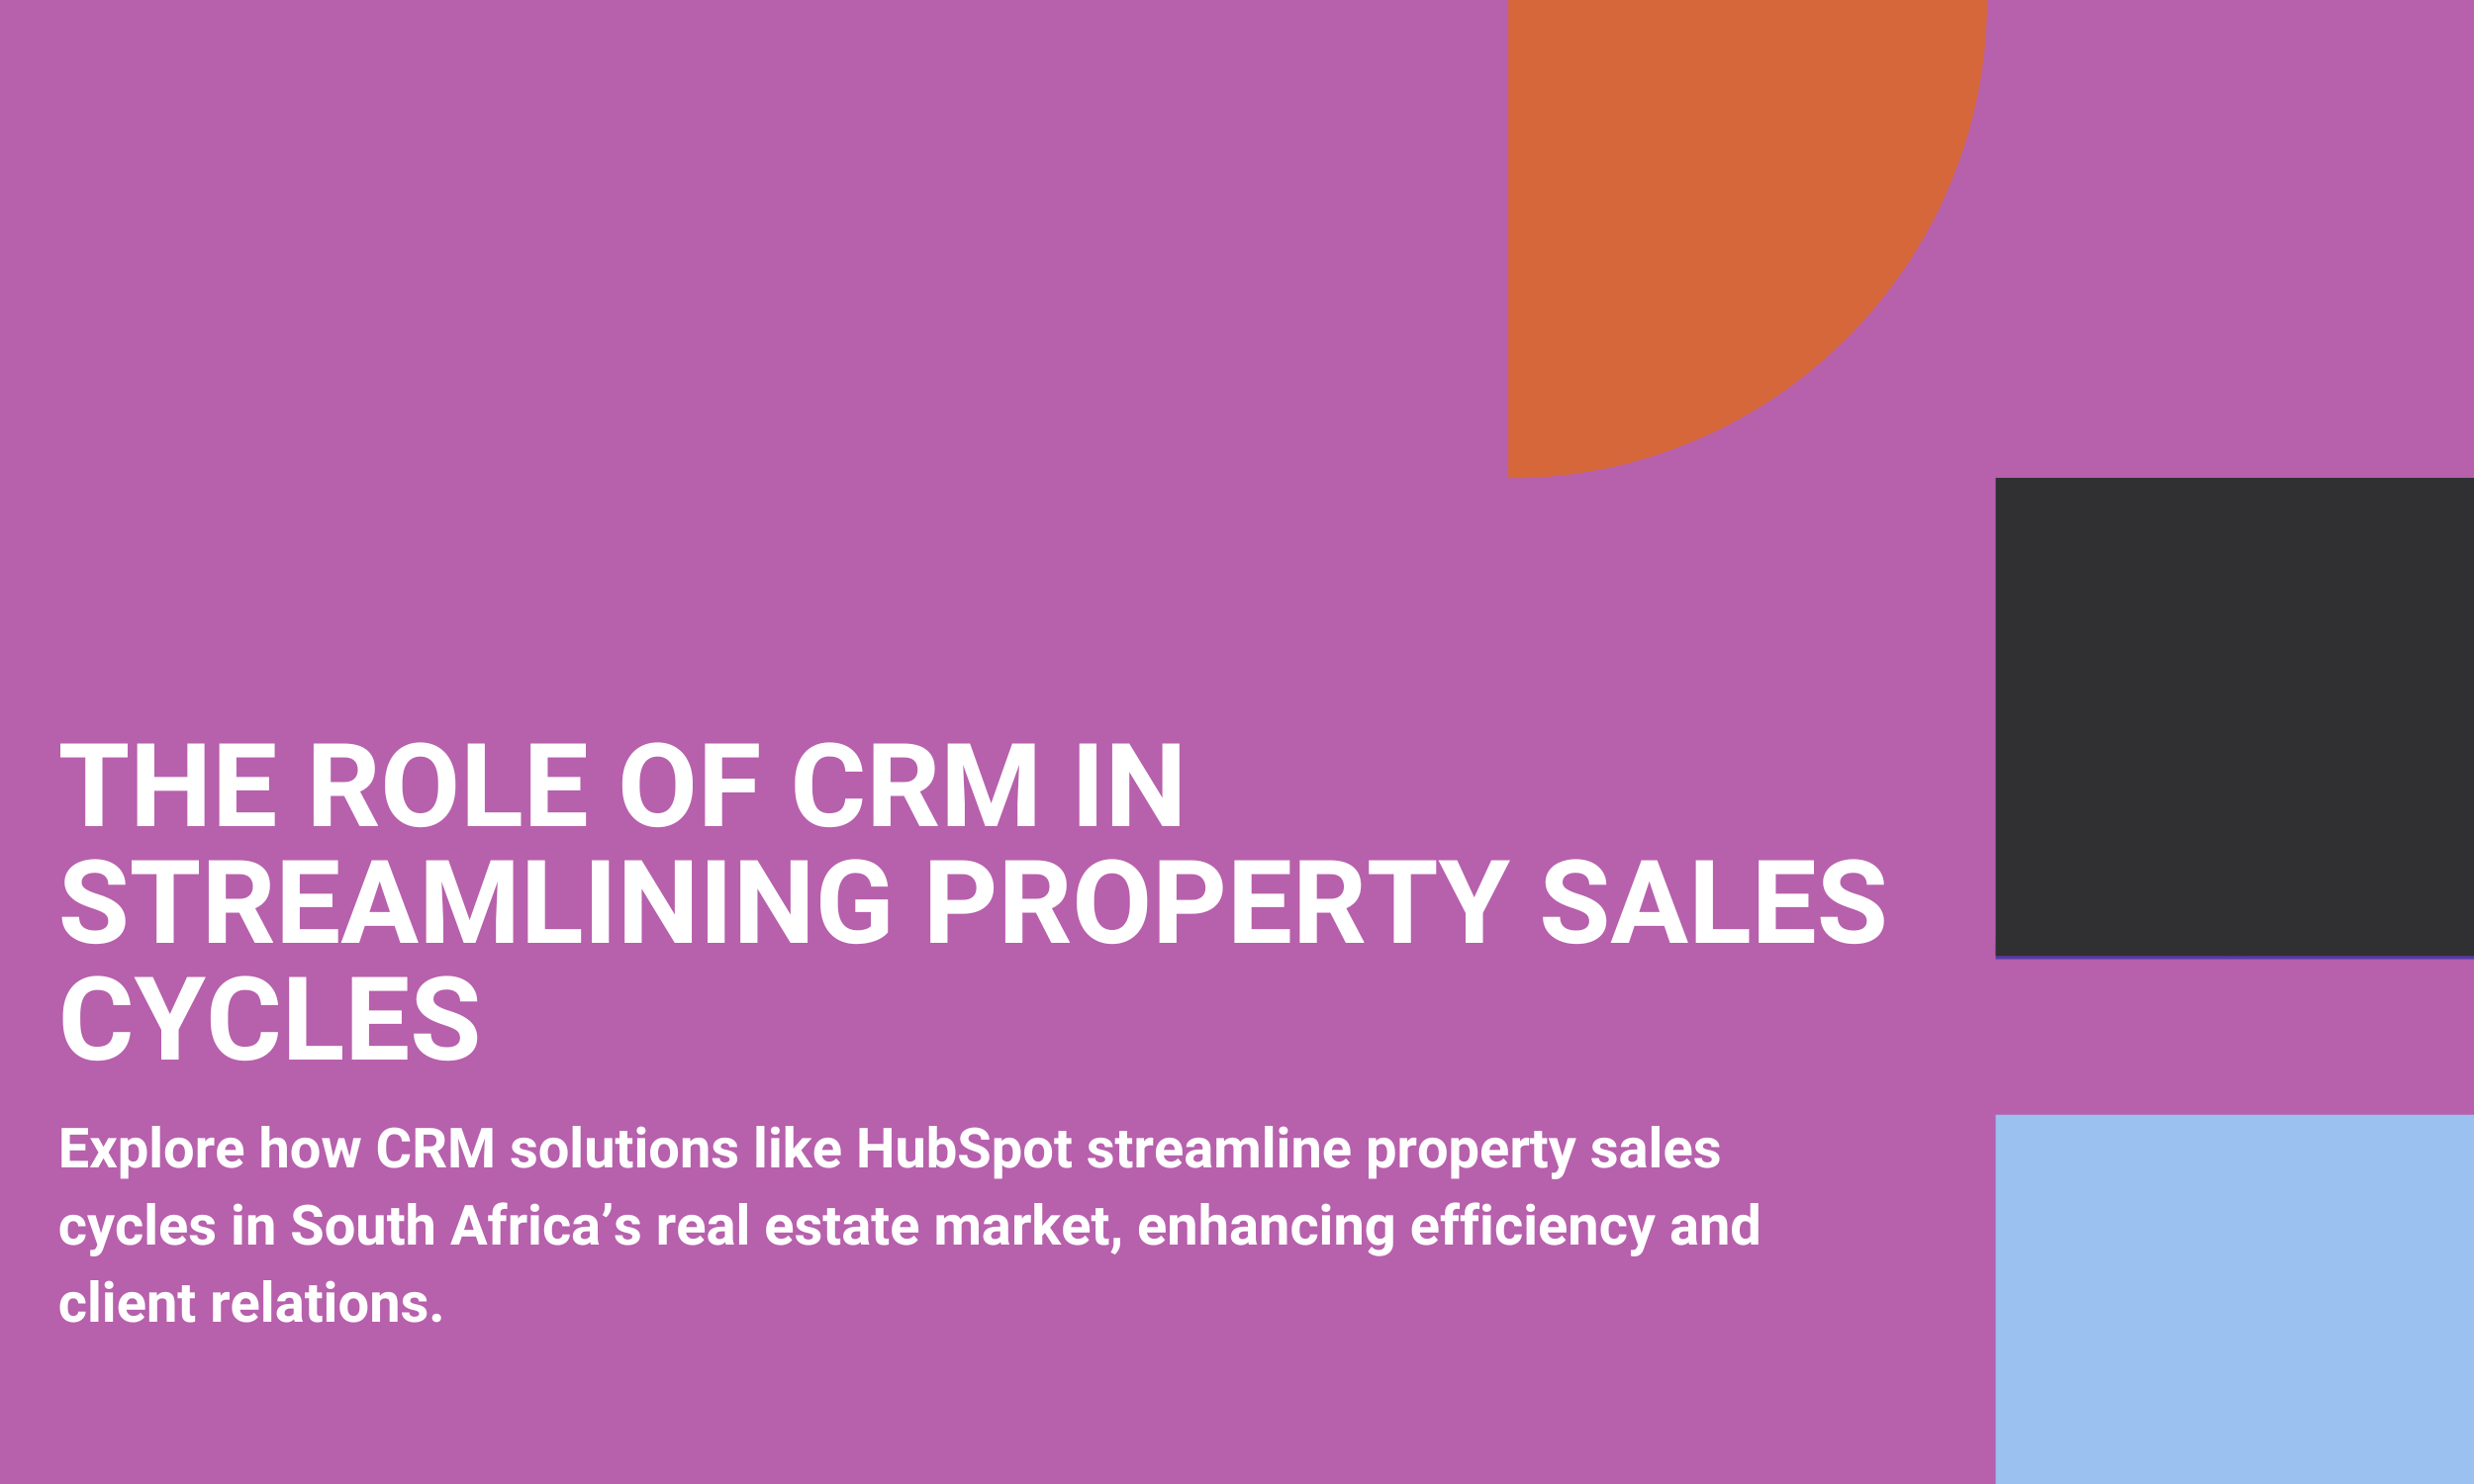 The Role of CRM in Streamlining Property Sales Cycles